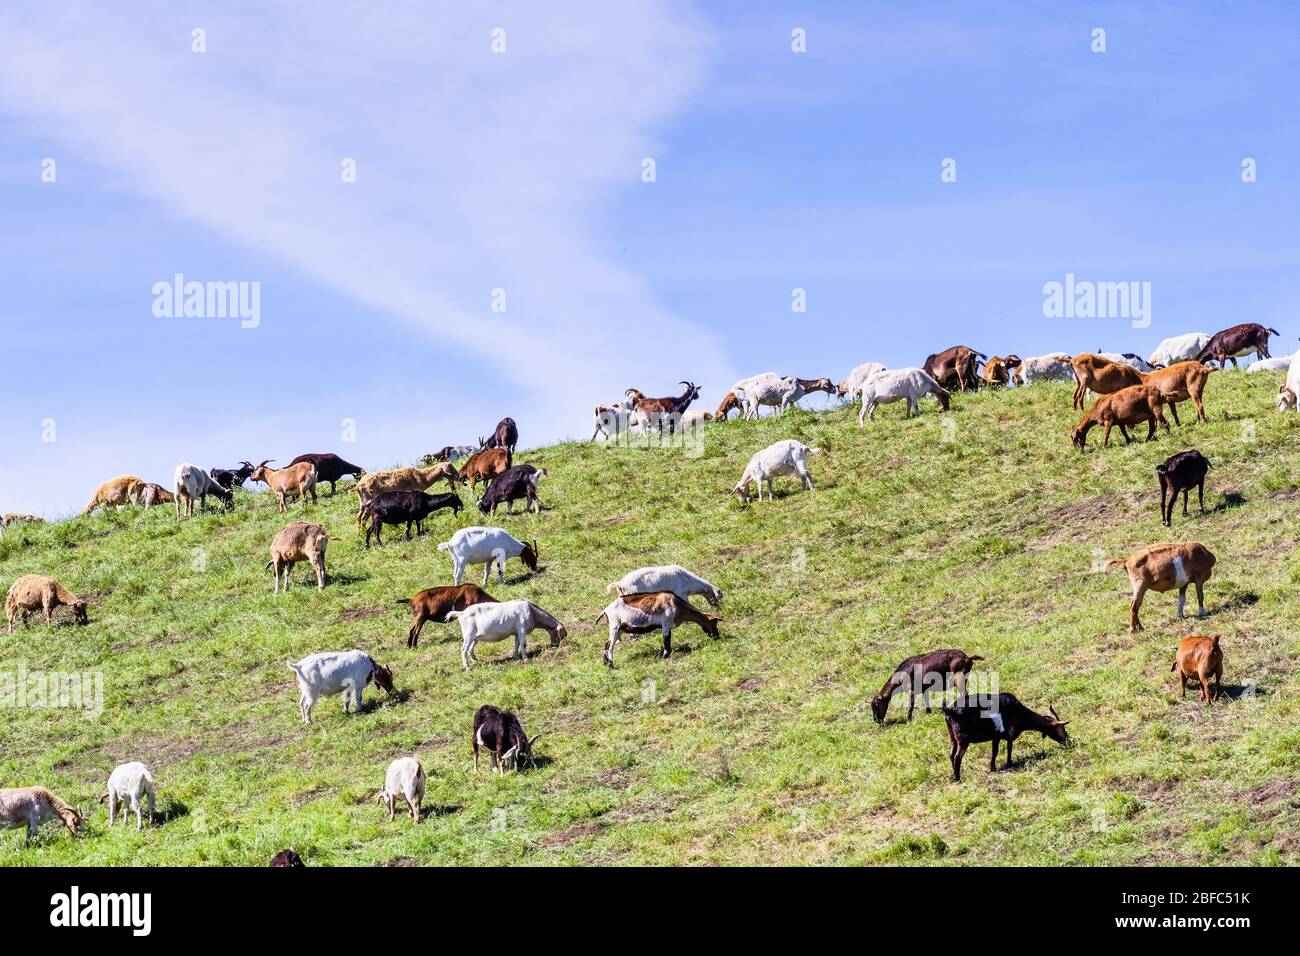 Herd of goats grazing on a hillside in Sunnyvale, South San Francisco Bay Area; Goats are being used in many western states as a wildfire prevention t Stock Photo